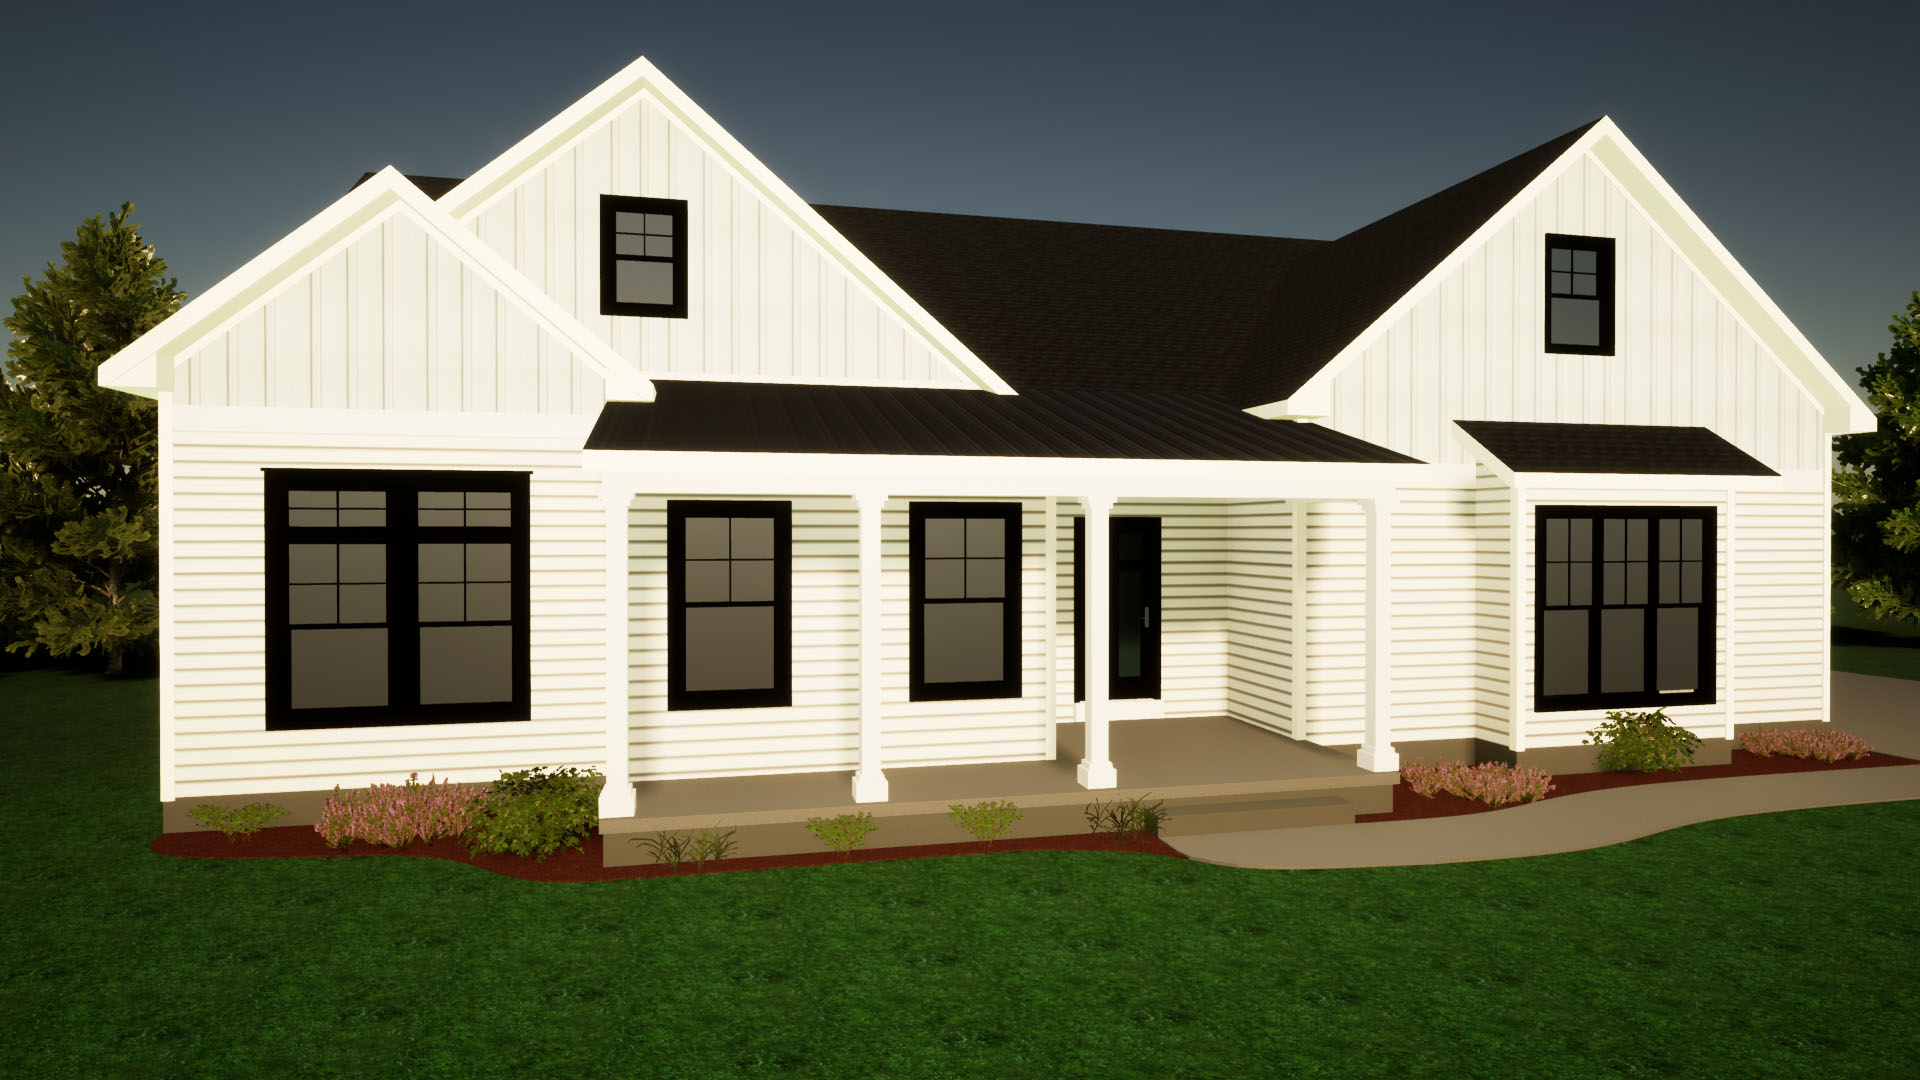 The Willow 2, Seely Homes, Greenwood, DE